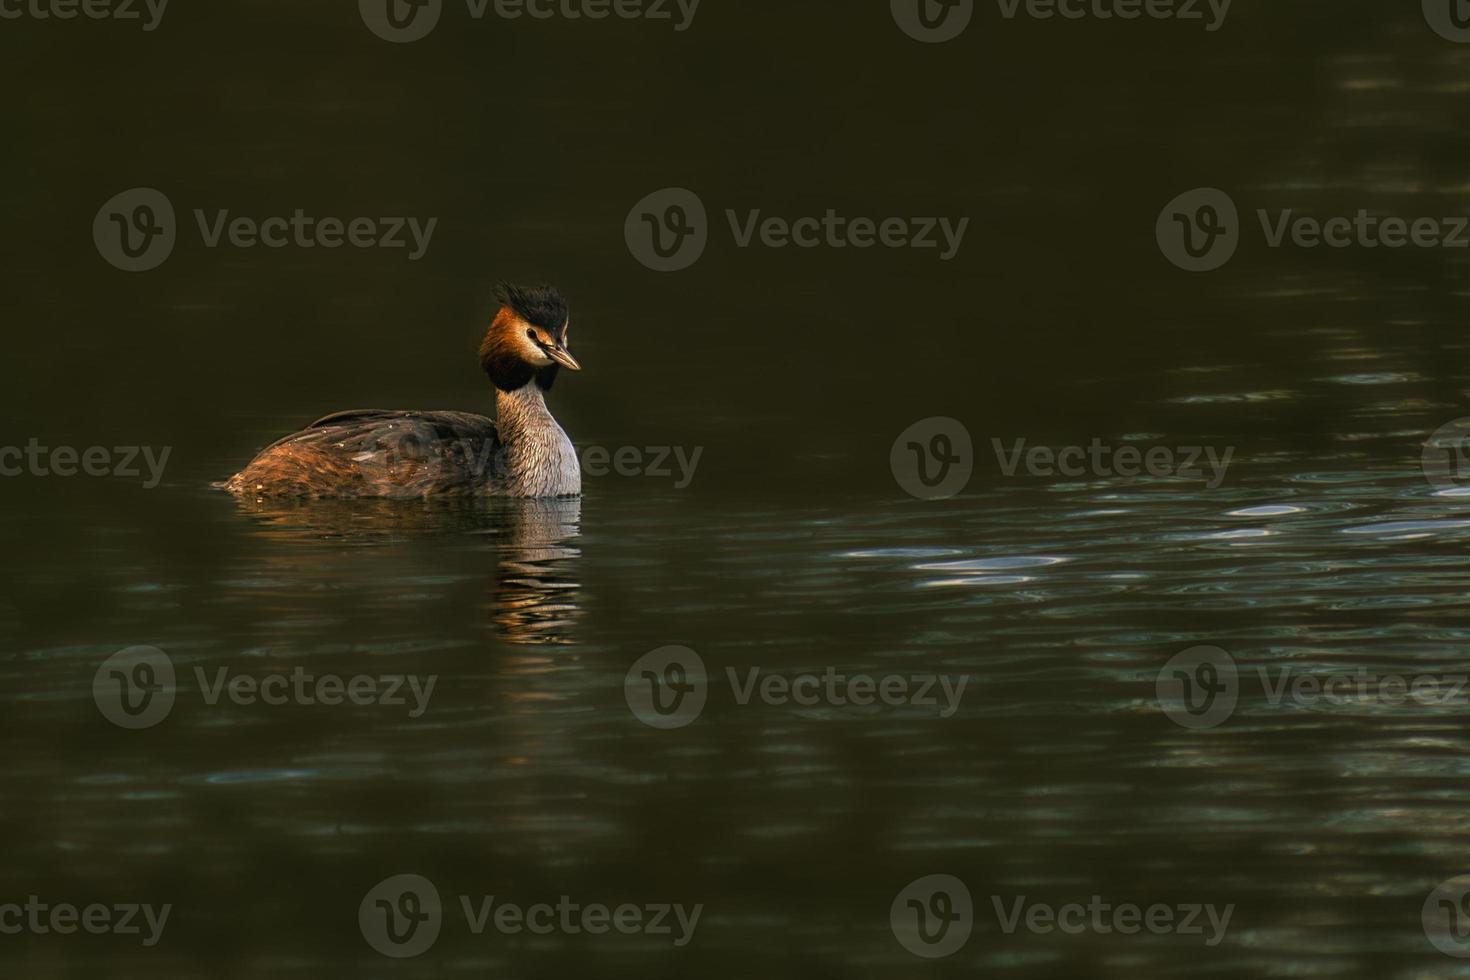 The Great Crested Grebe was Bird of the Year 2001 in Germany and Austria photo